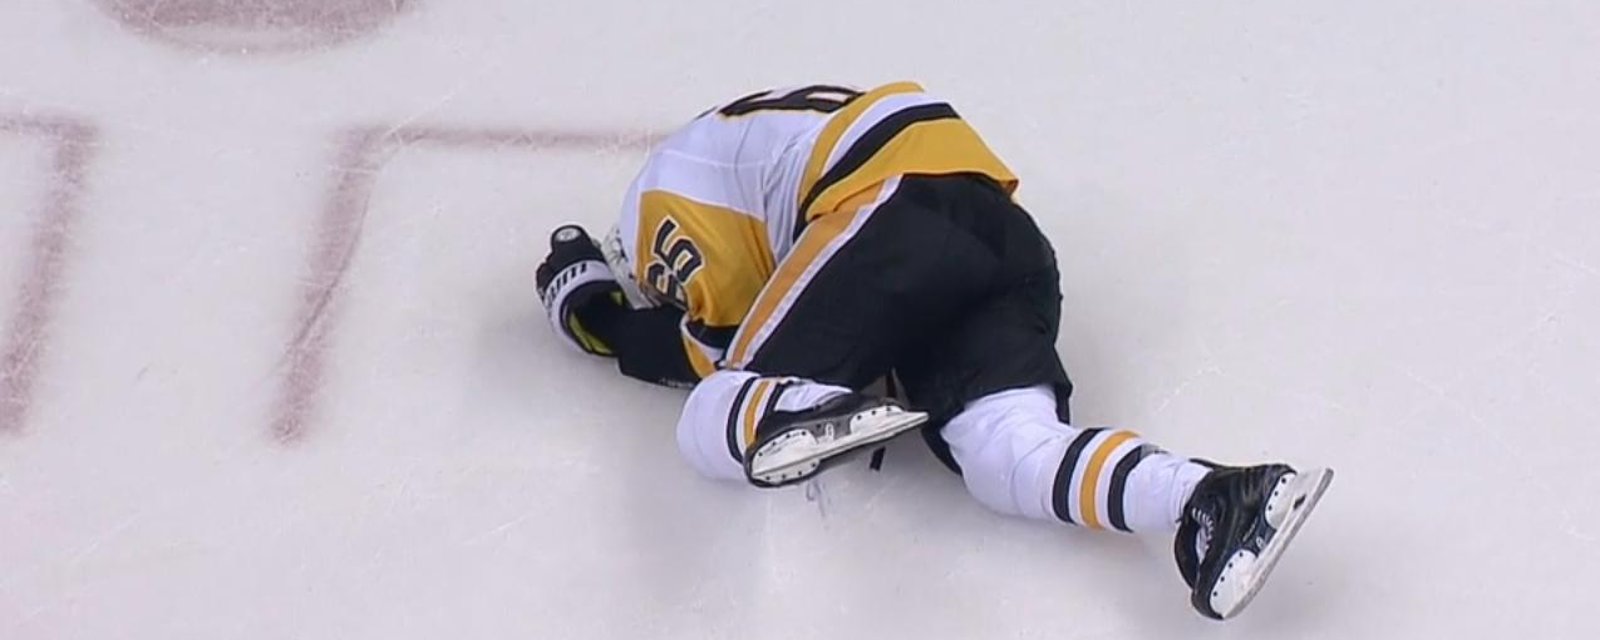 Hainsey possibly concussed after blocking Ovechkin's shot with his head. 